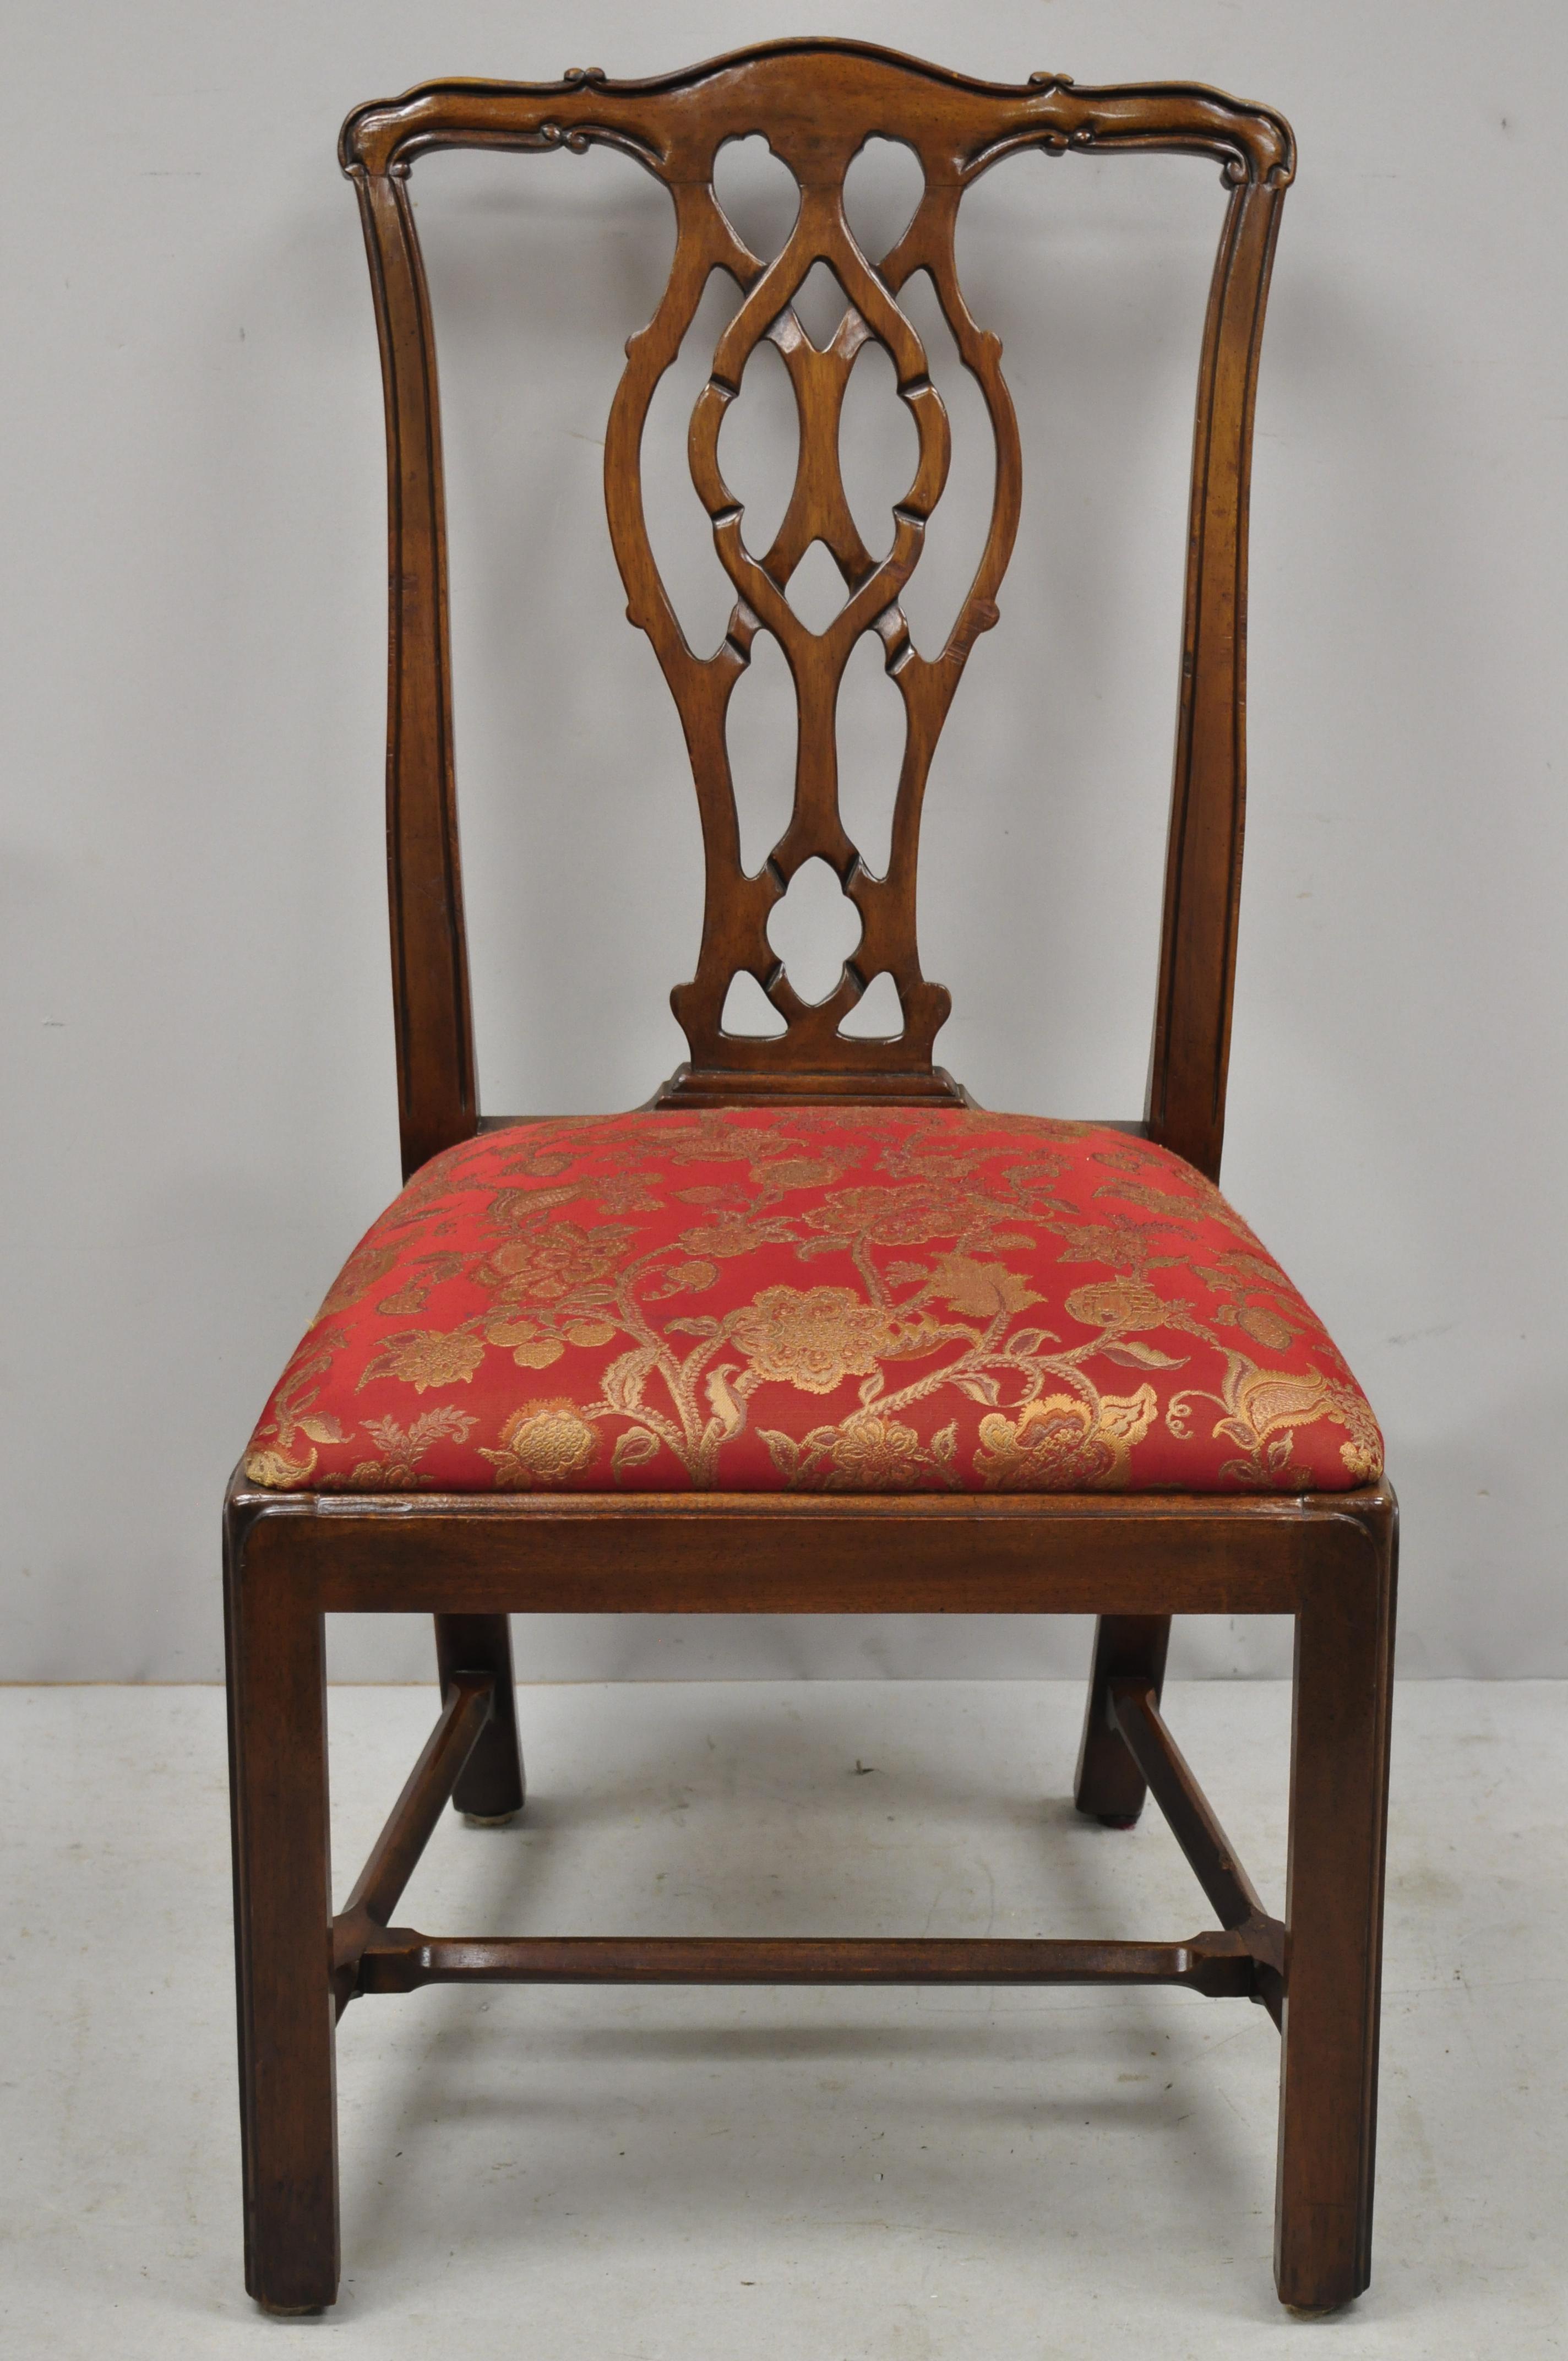 Set of 4 mahogany Chippendale style dining side chairs attributed to Bernhardt. Listing includes (4) side chairs, solid wood frame, nicely carved details, very nice vintage item, great style and form, circa mid-late 20th century. Measurements: 39